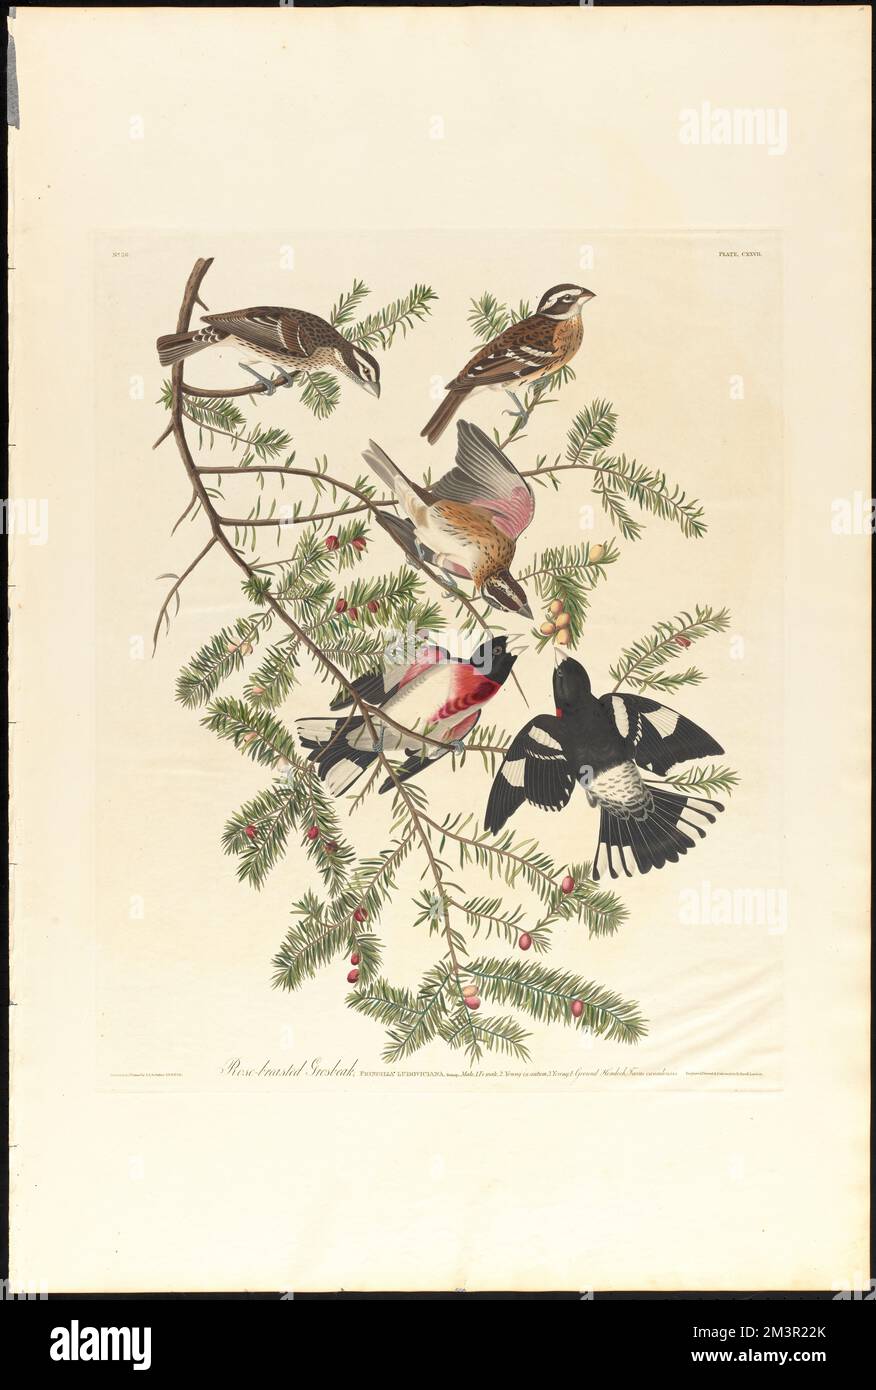 Rose-breasted grosbeak : Fringilla ludoviciana, Bonap. Male, 1. Female, 2. Young in autum, 3. Young, 4. Ground hemlock. Taxus canadensis. c.1 v.2 plate 127 , Birds, Trees, Cardinalis, Taxus. The Birds of America- From Original Drawings by John James Audubon Stock Photo